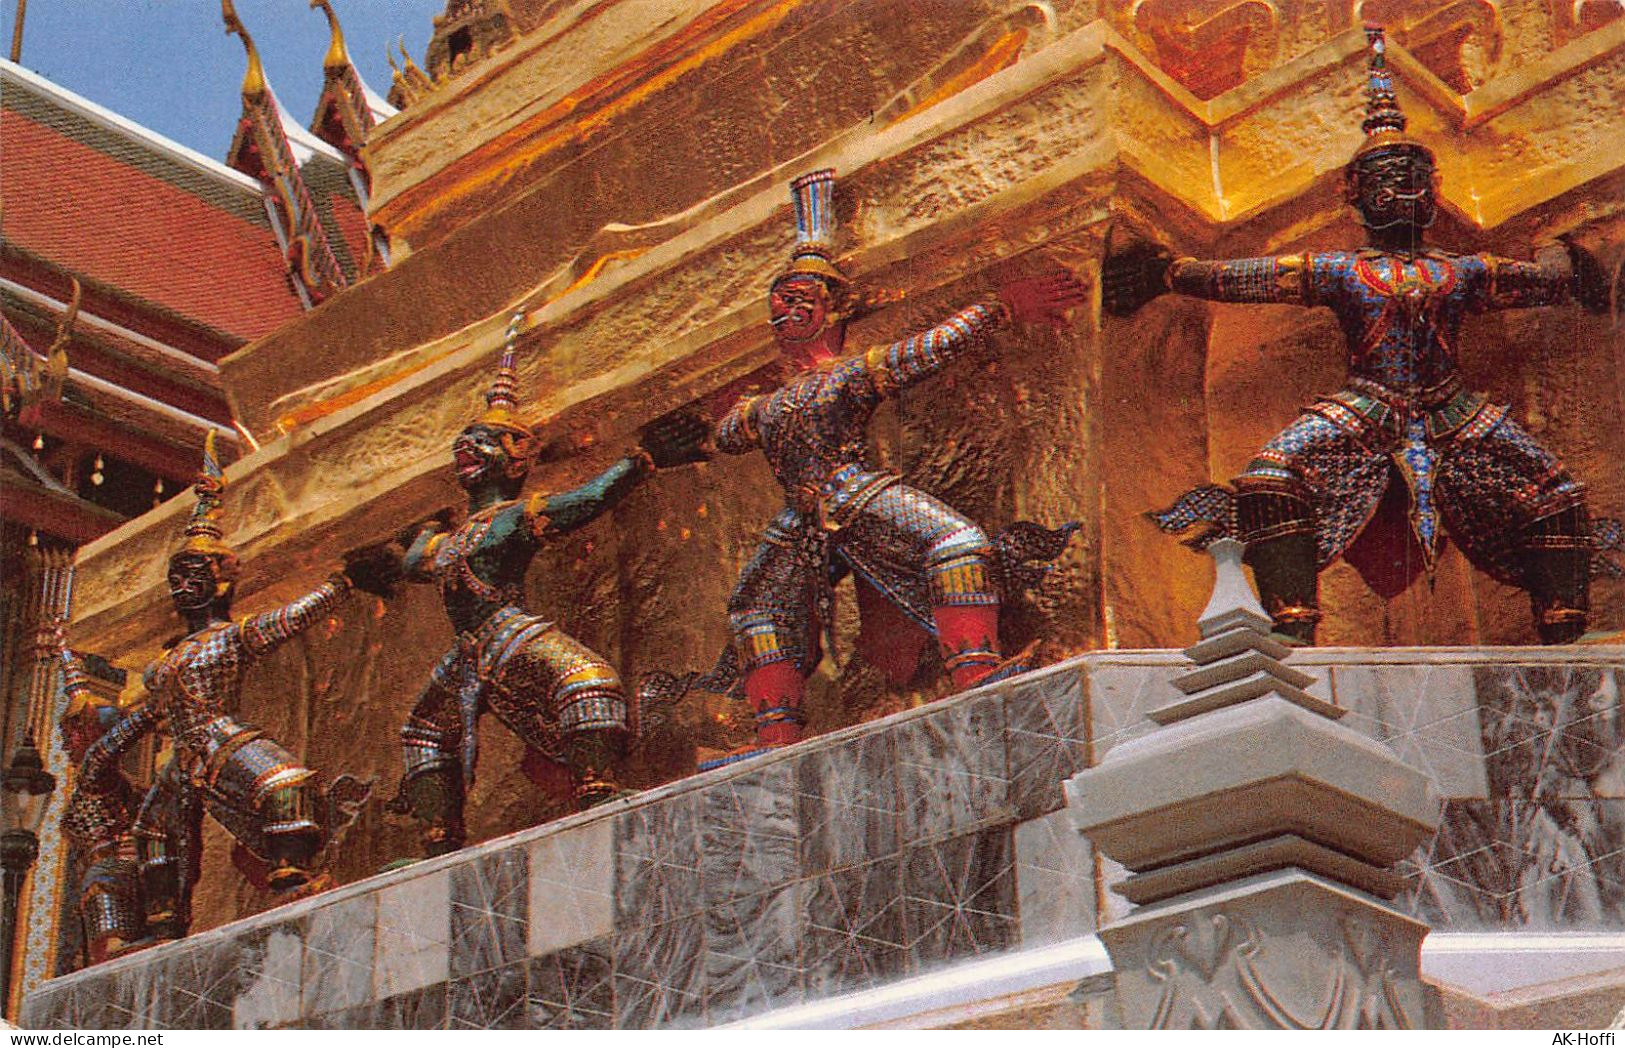 A Group Of Demons Suppose To Be Standing And Lifting The Temple Of Emerald Buddha, Bangkok, Thailand - Tailandia